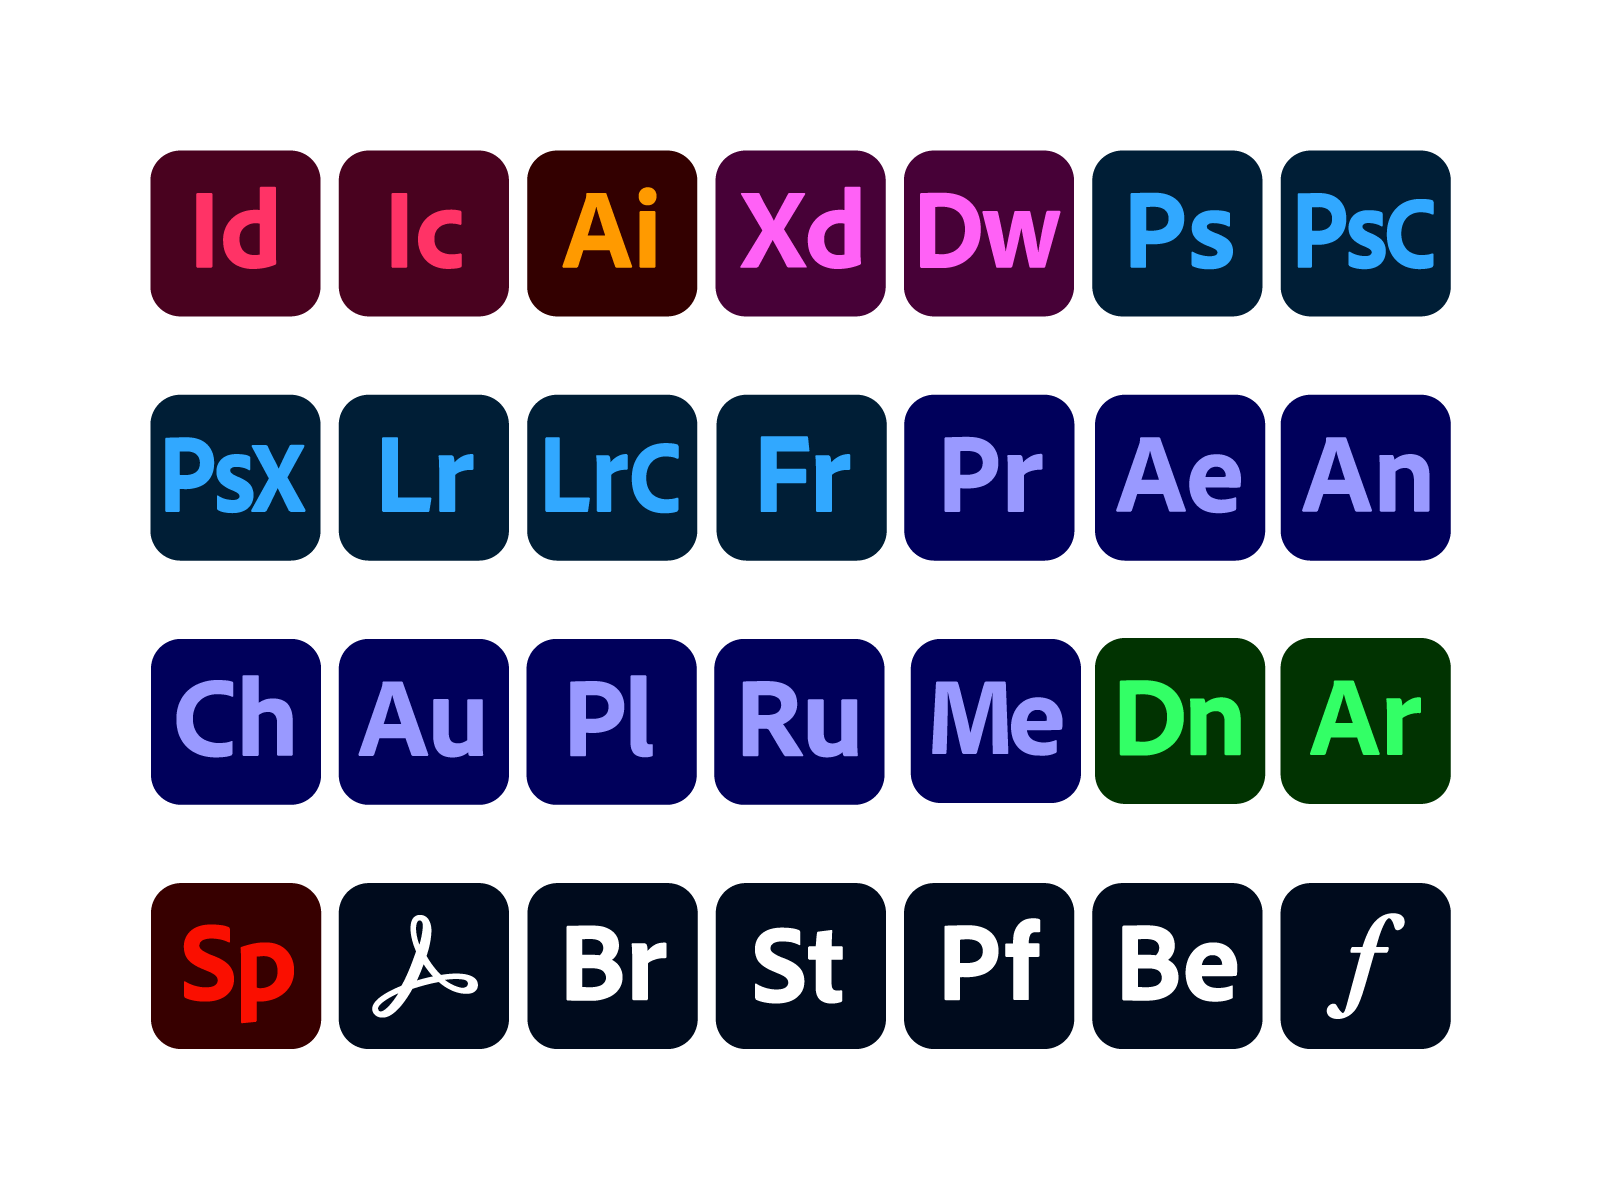 FREE 2020 Adobe CC apps icon set by Steven Queiruga on ...